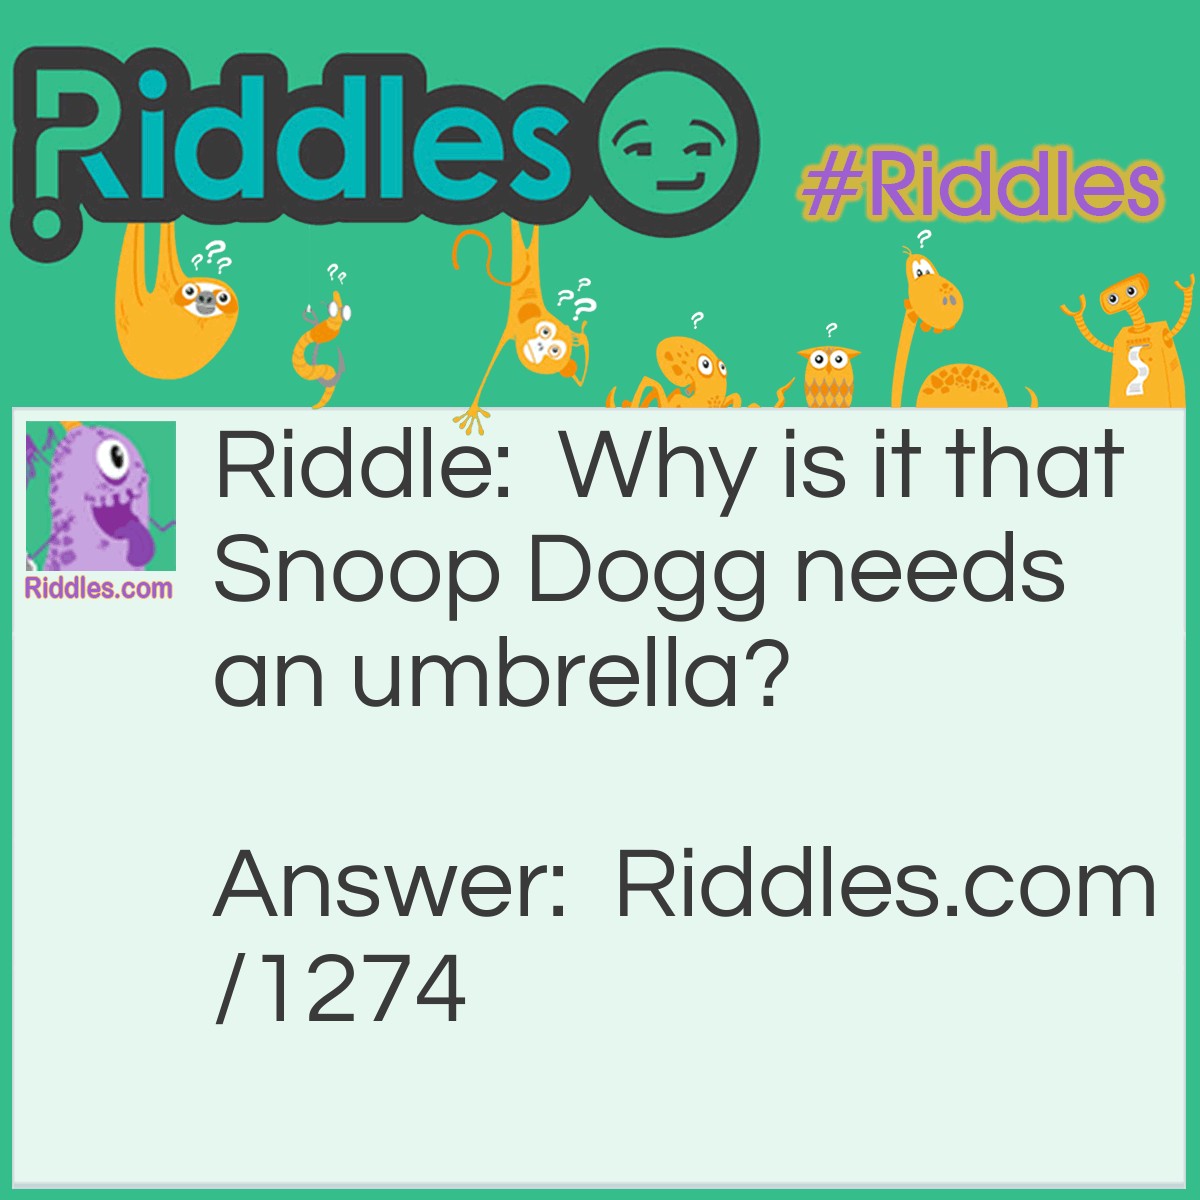 Riddle: Why is it that Snoop Dogg needs an umbrella? Answer: Because of the drizzle.